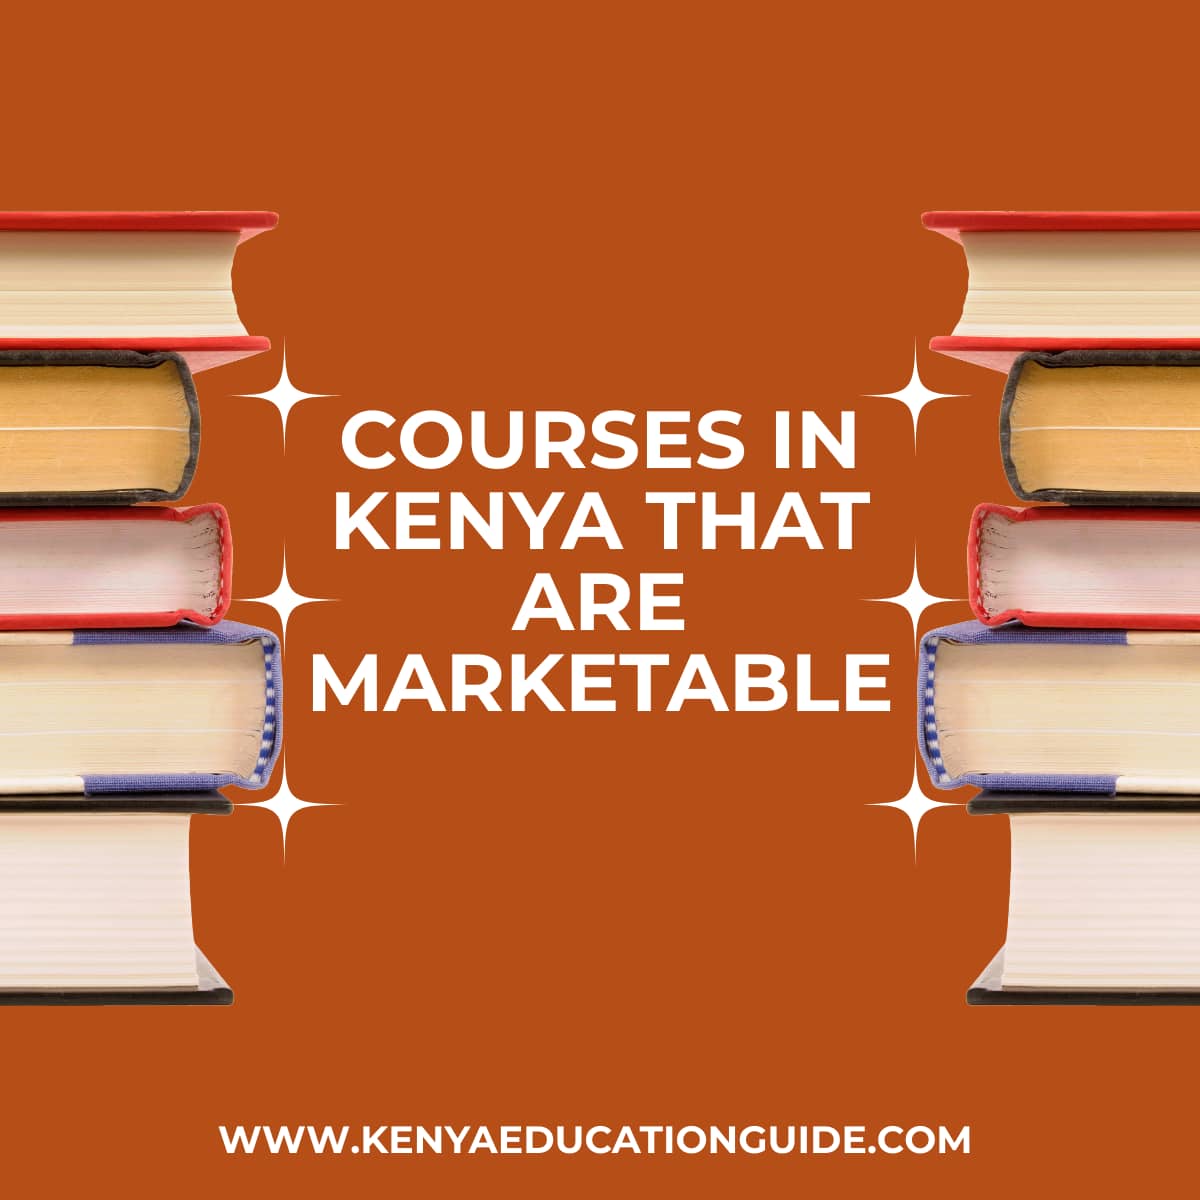 Courses in Kenya that are marketable